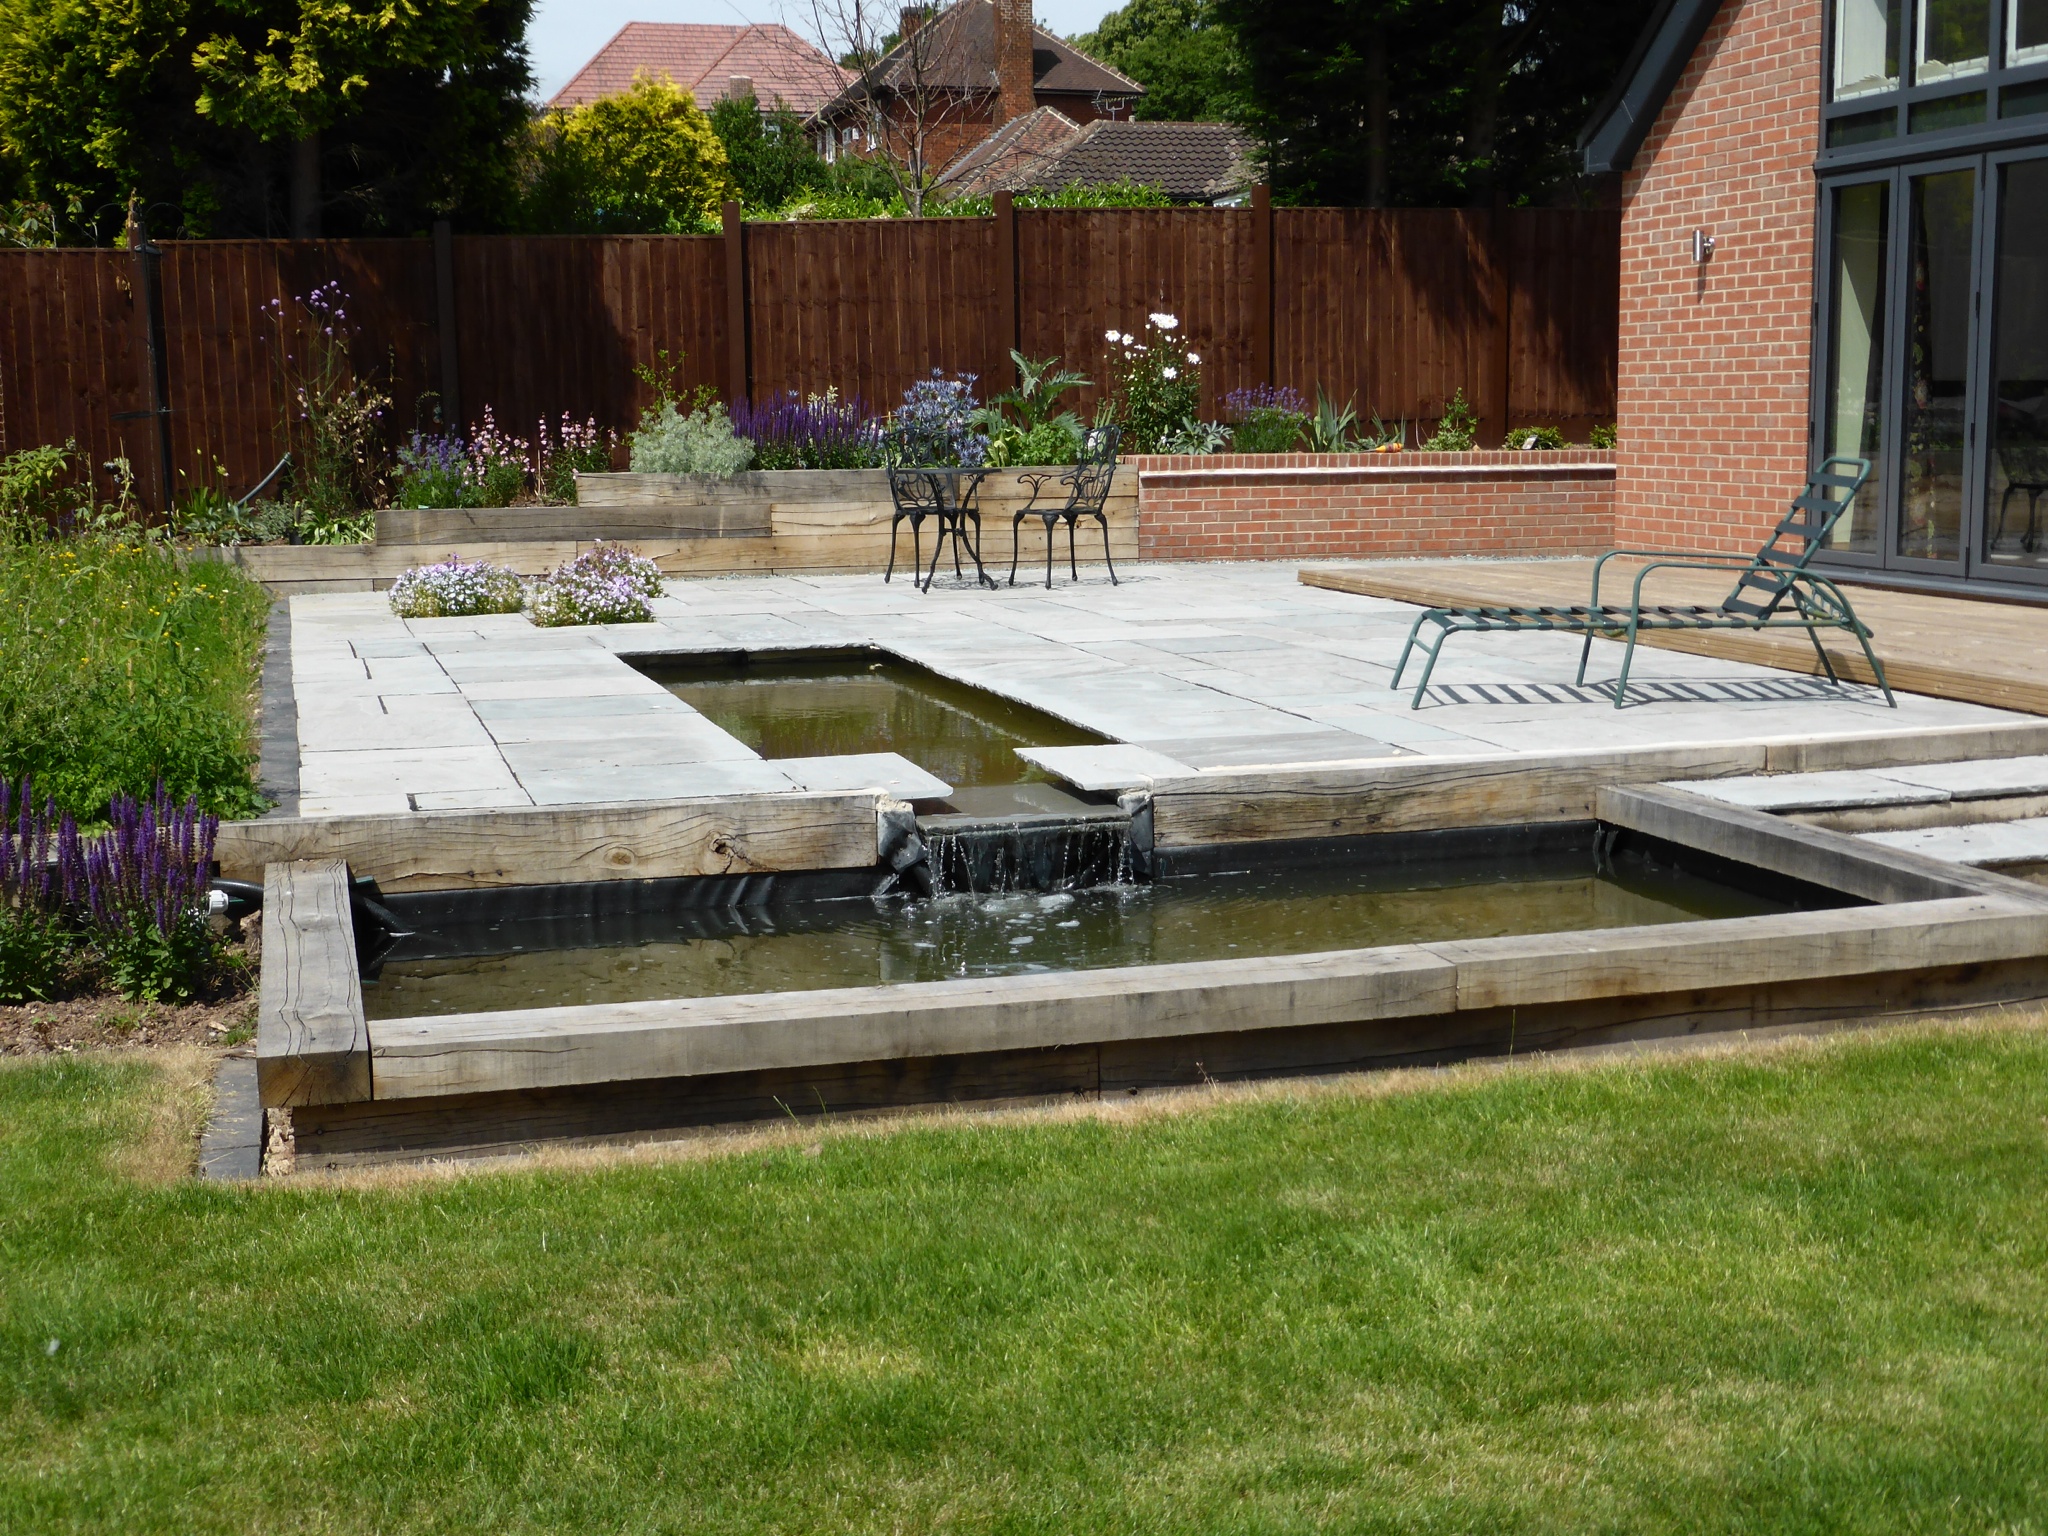 </p> <p>Find your ideal home design pro on designfor-me.com - get matched and see who's interested in your home project. Click image to see more inspiration from our design pros</p> <p>Design by Joanne, garden designer from North West Leicestershire, East Midlands</p> <p> #gardendesign #gardeninspiration #gardenlove #gardenideas #gardens </p> <p>